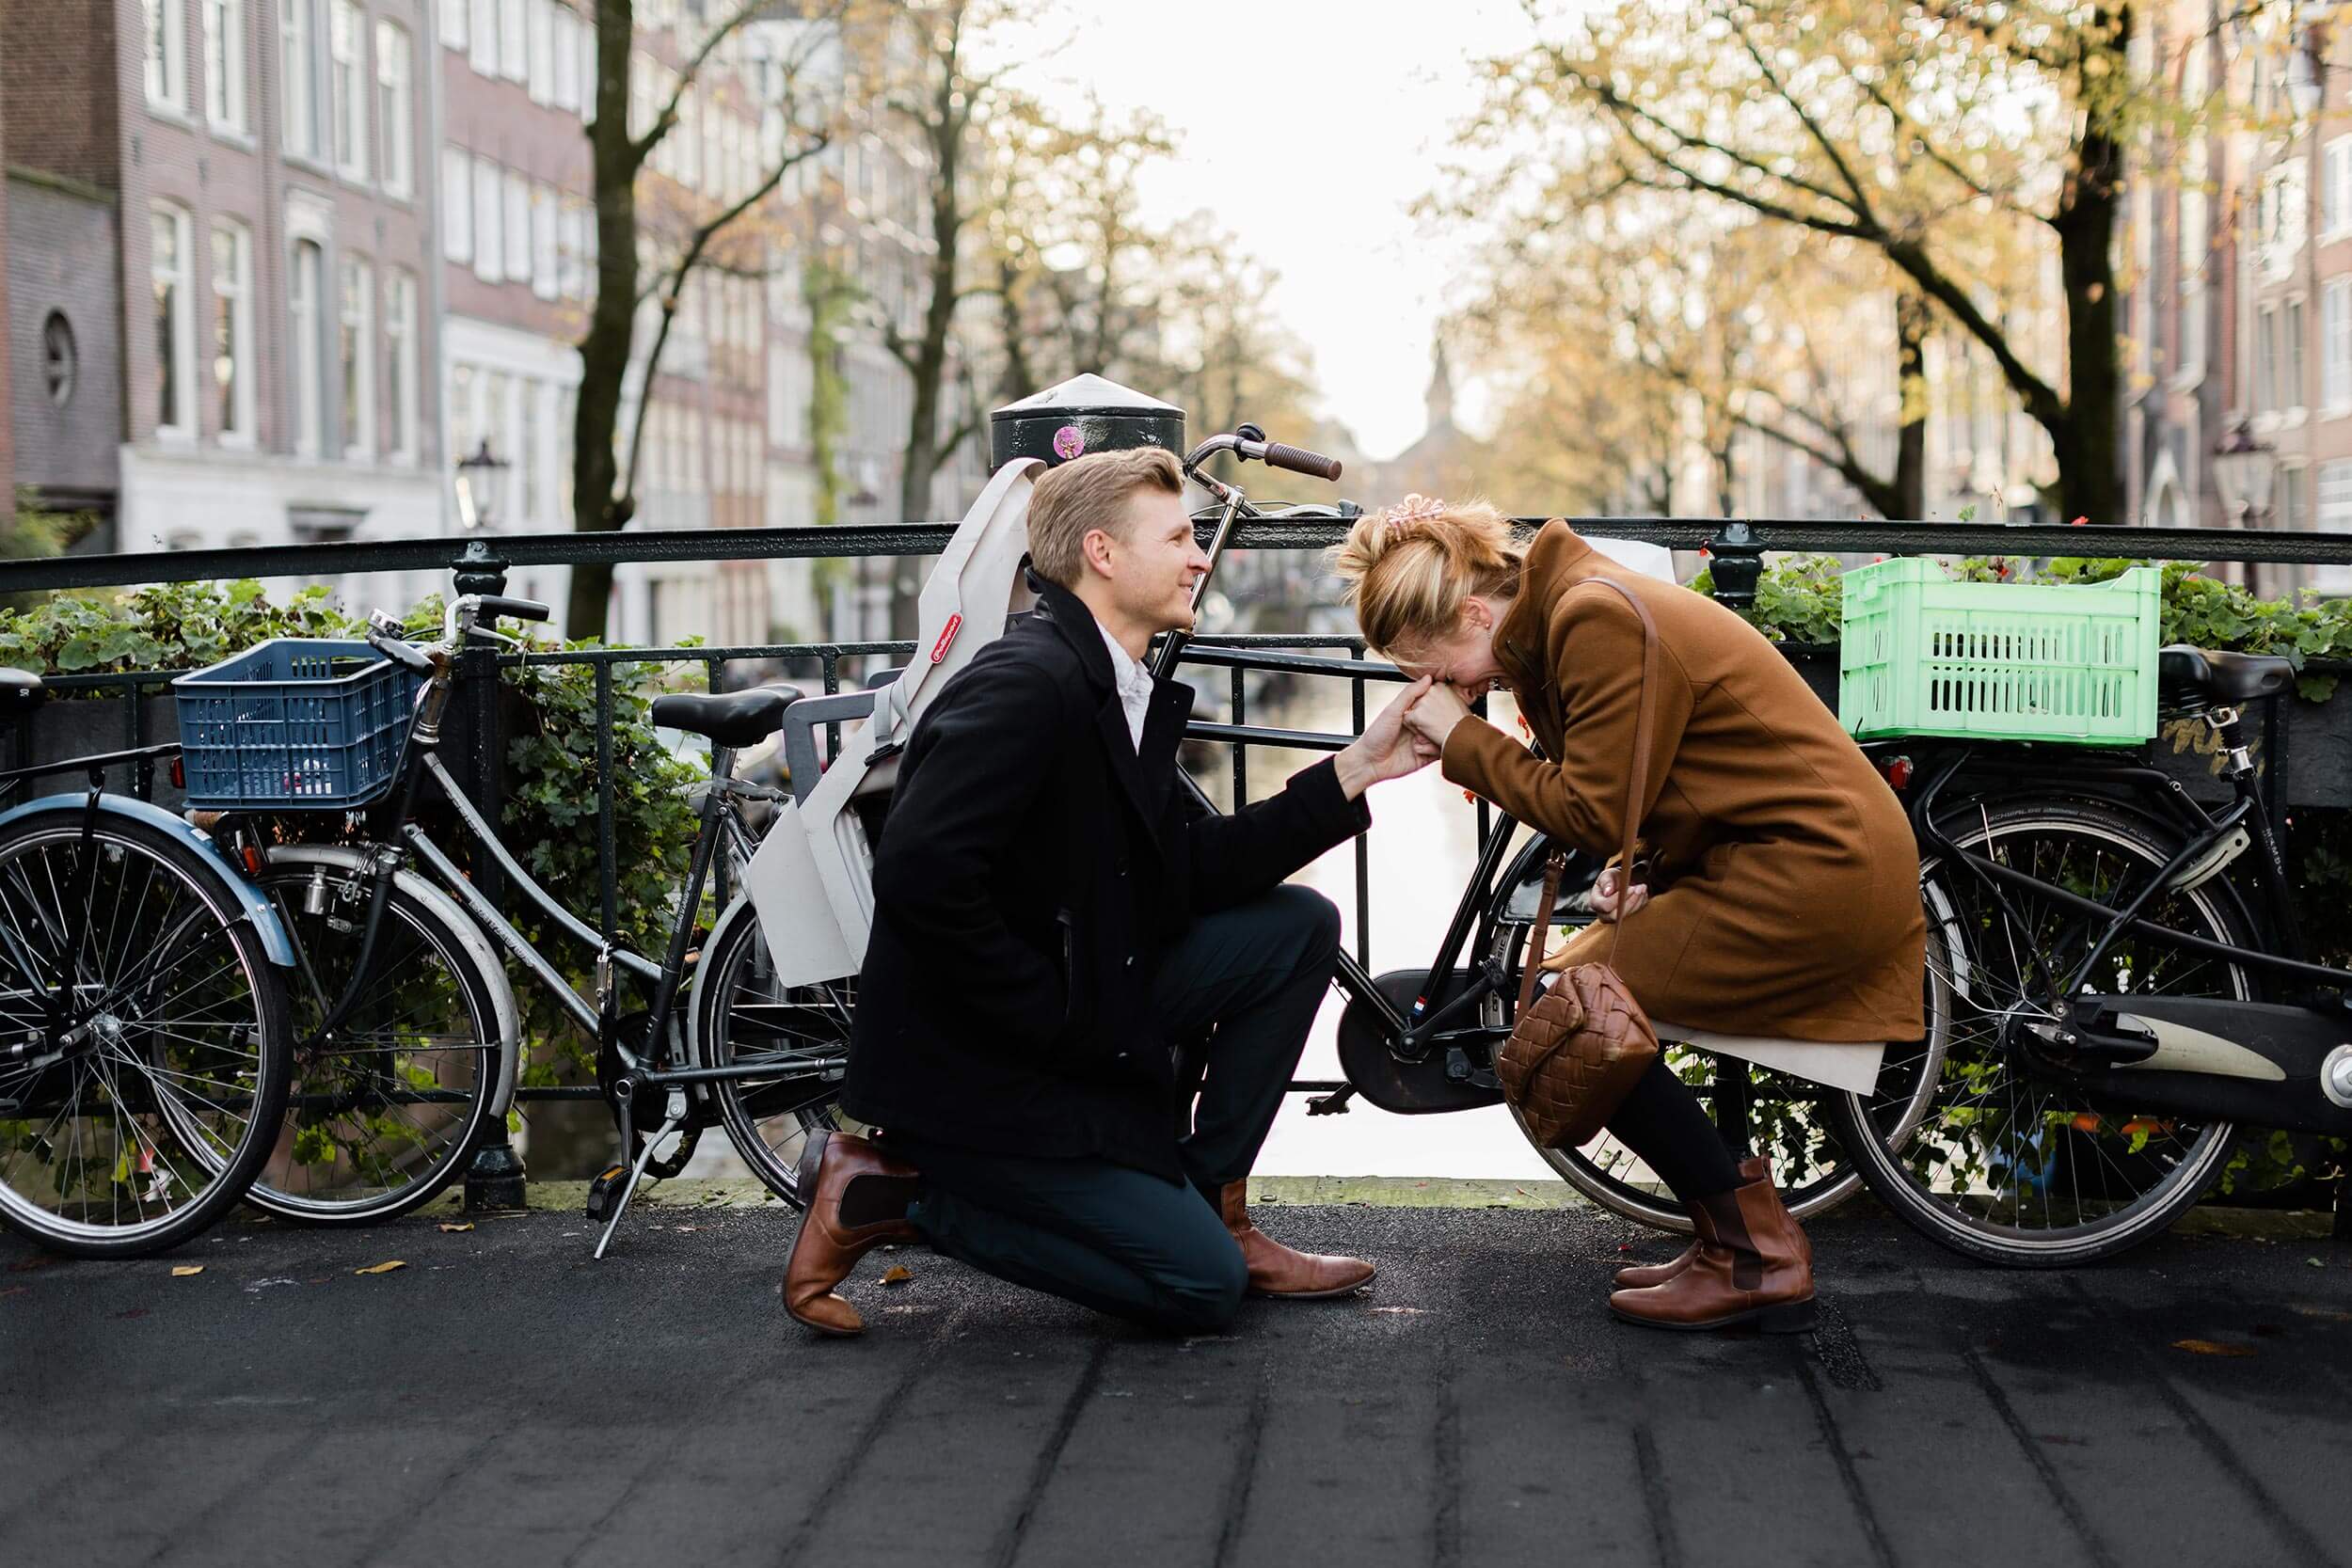 alt="surprise proposal photography session in Amsterdam"